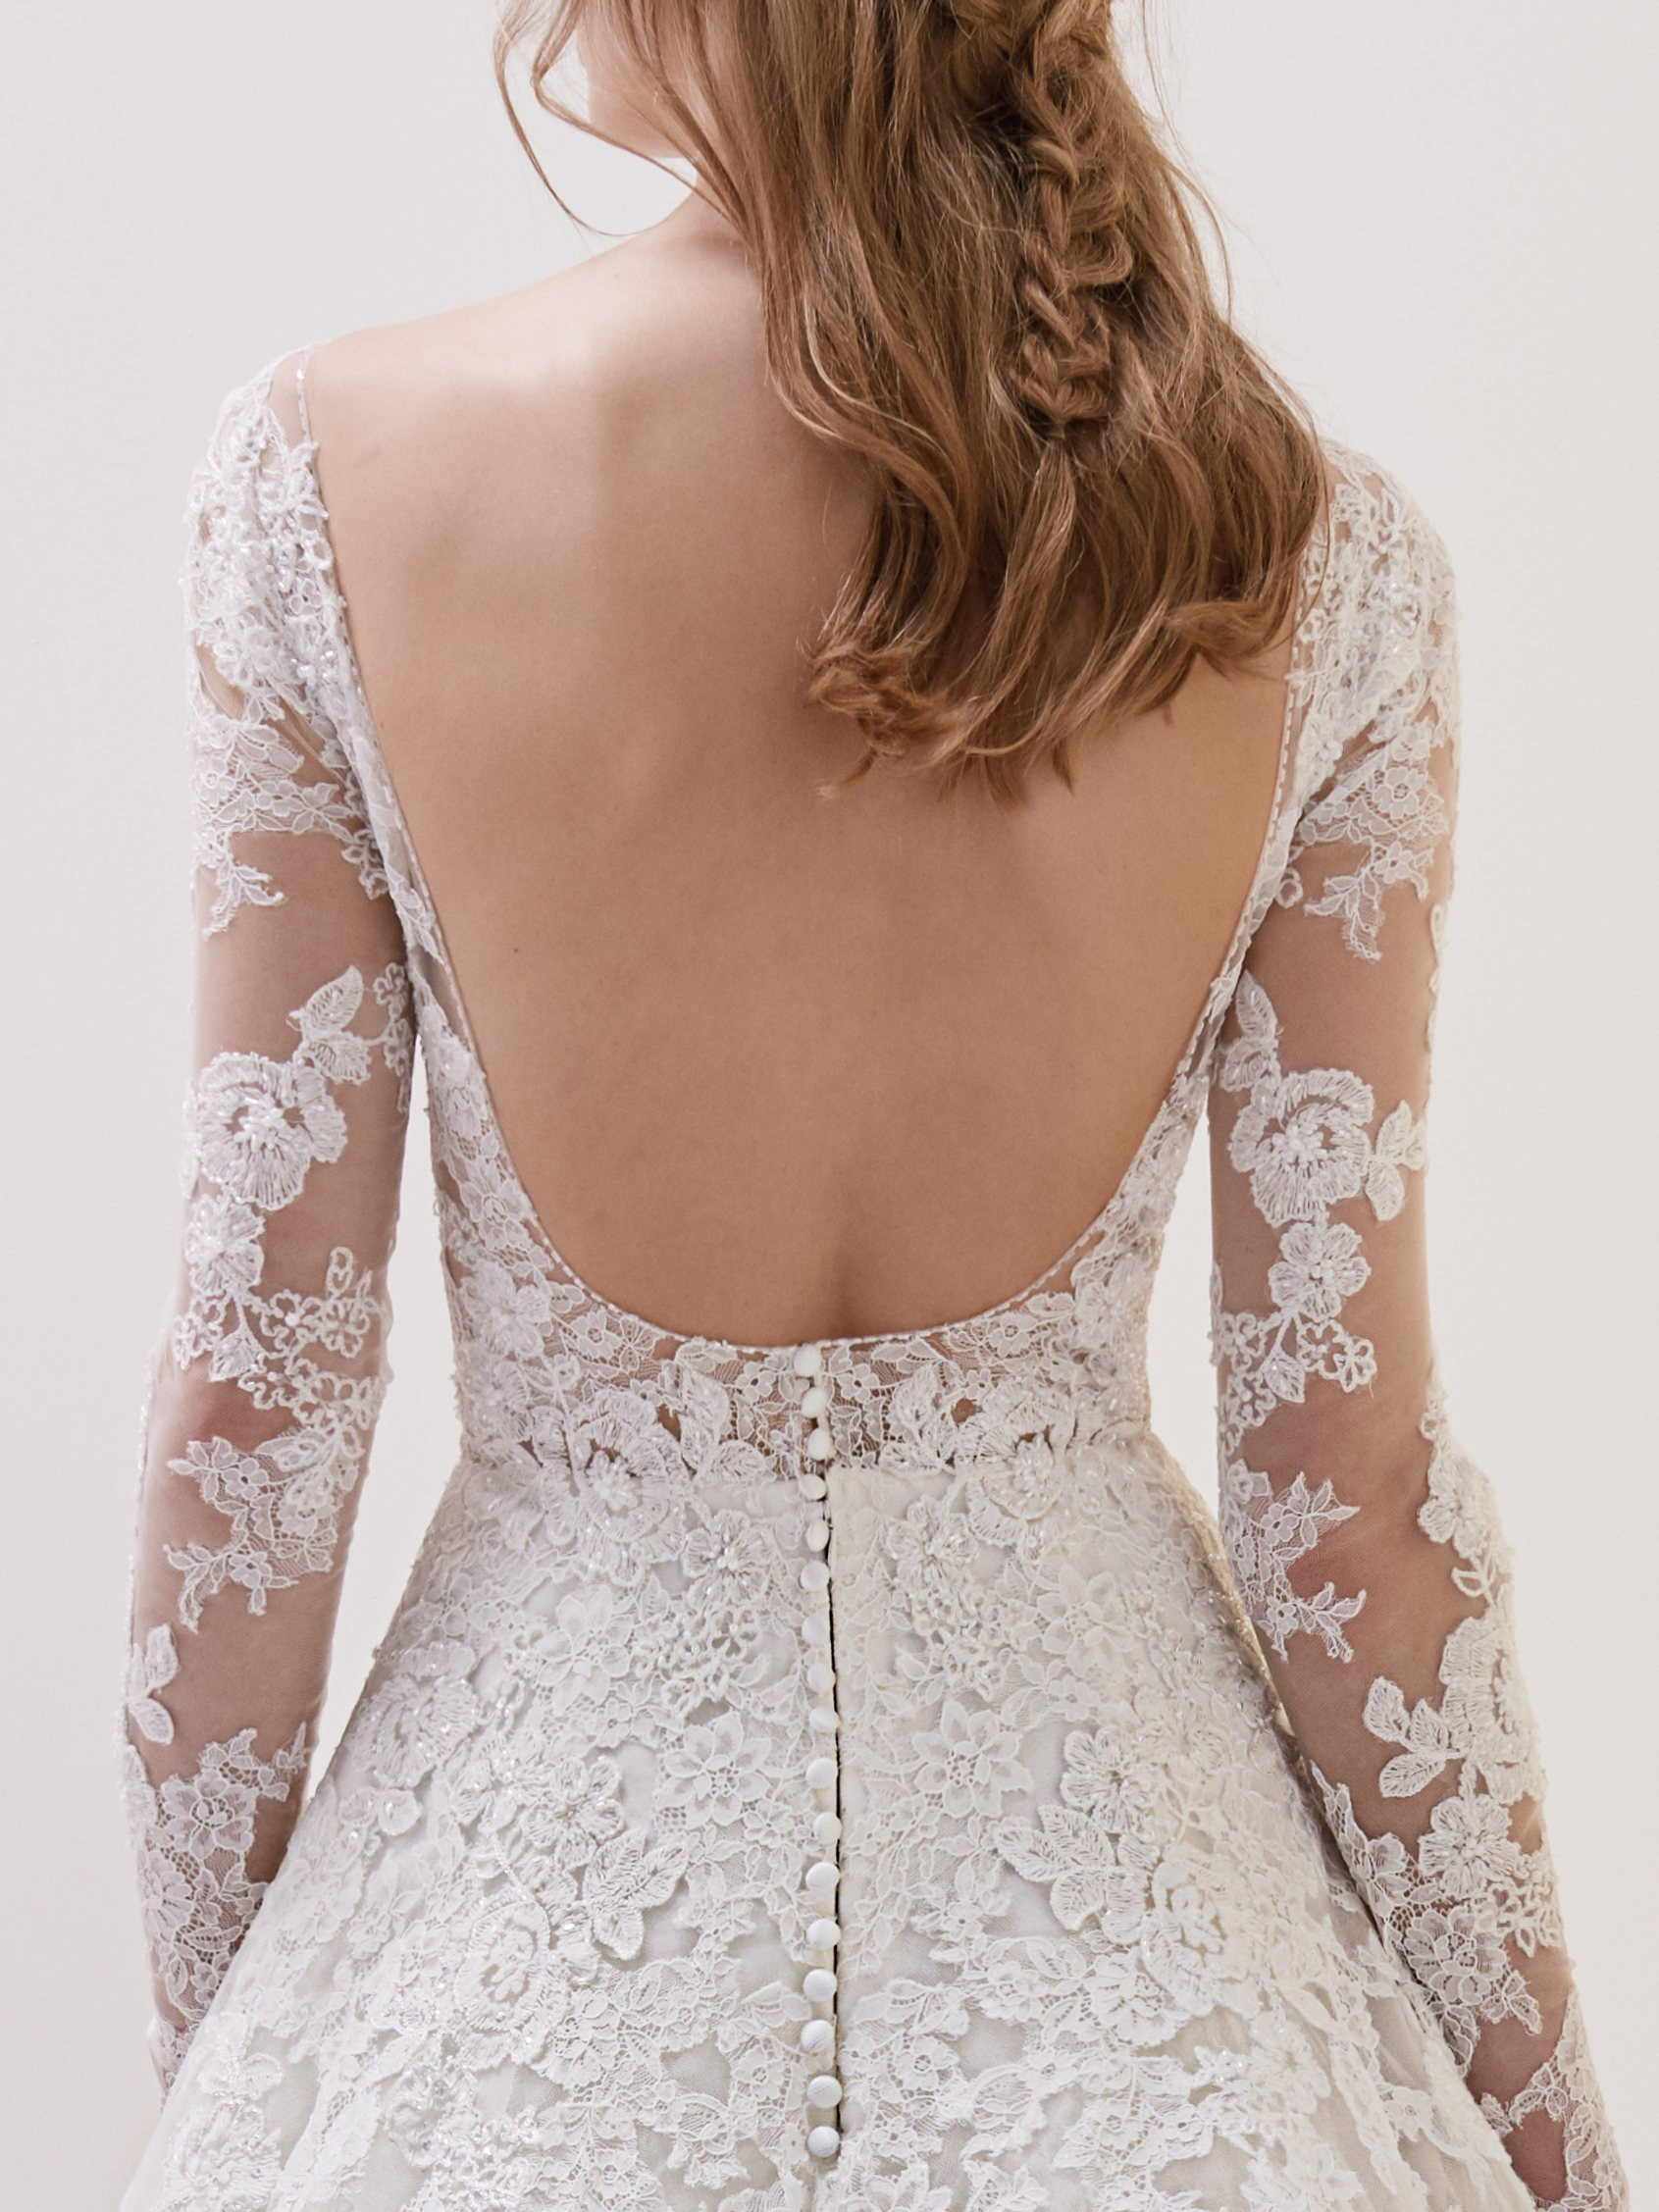 The Tattoo Lace Wedding Dress Trend: 5 Beautiful Lace Illusion Mermaid  Wedding Dresses by Pronovias Barcelona Bridal - Fashionably Yours Bridal &  Formal Wear